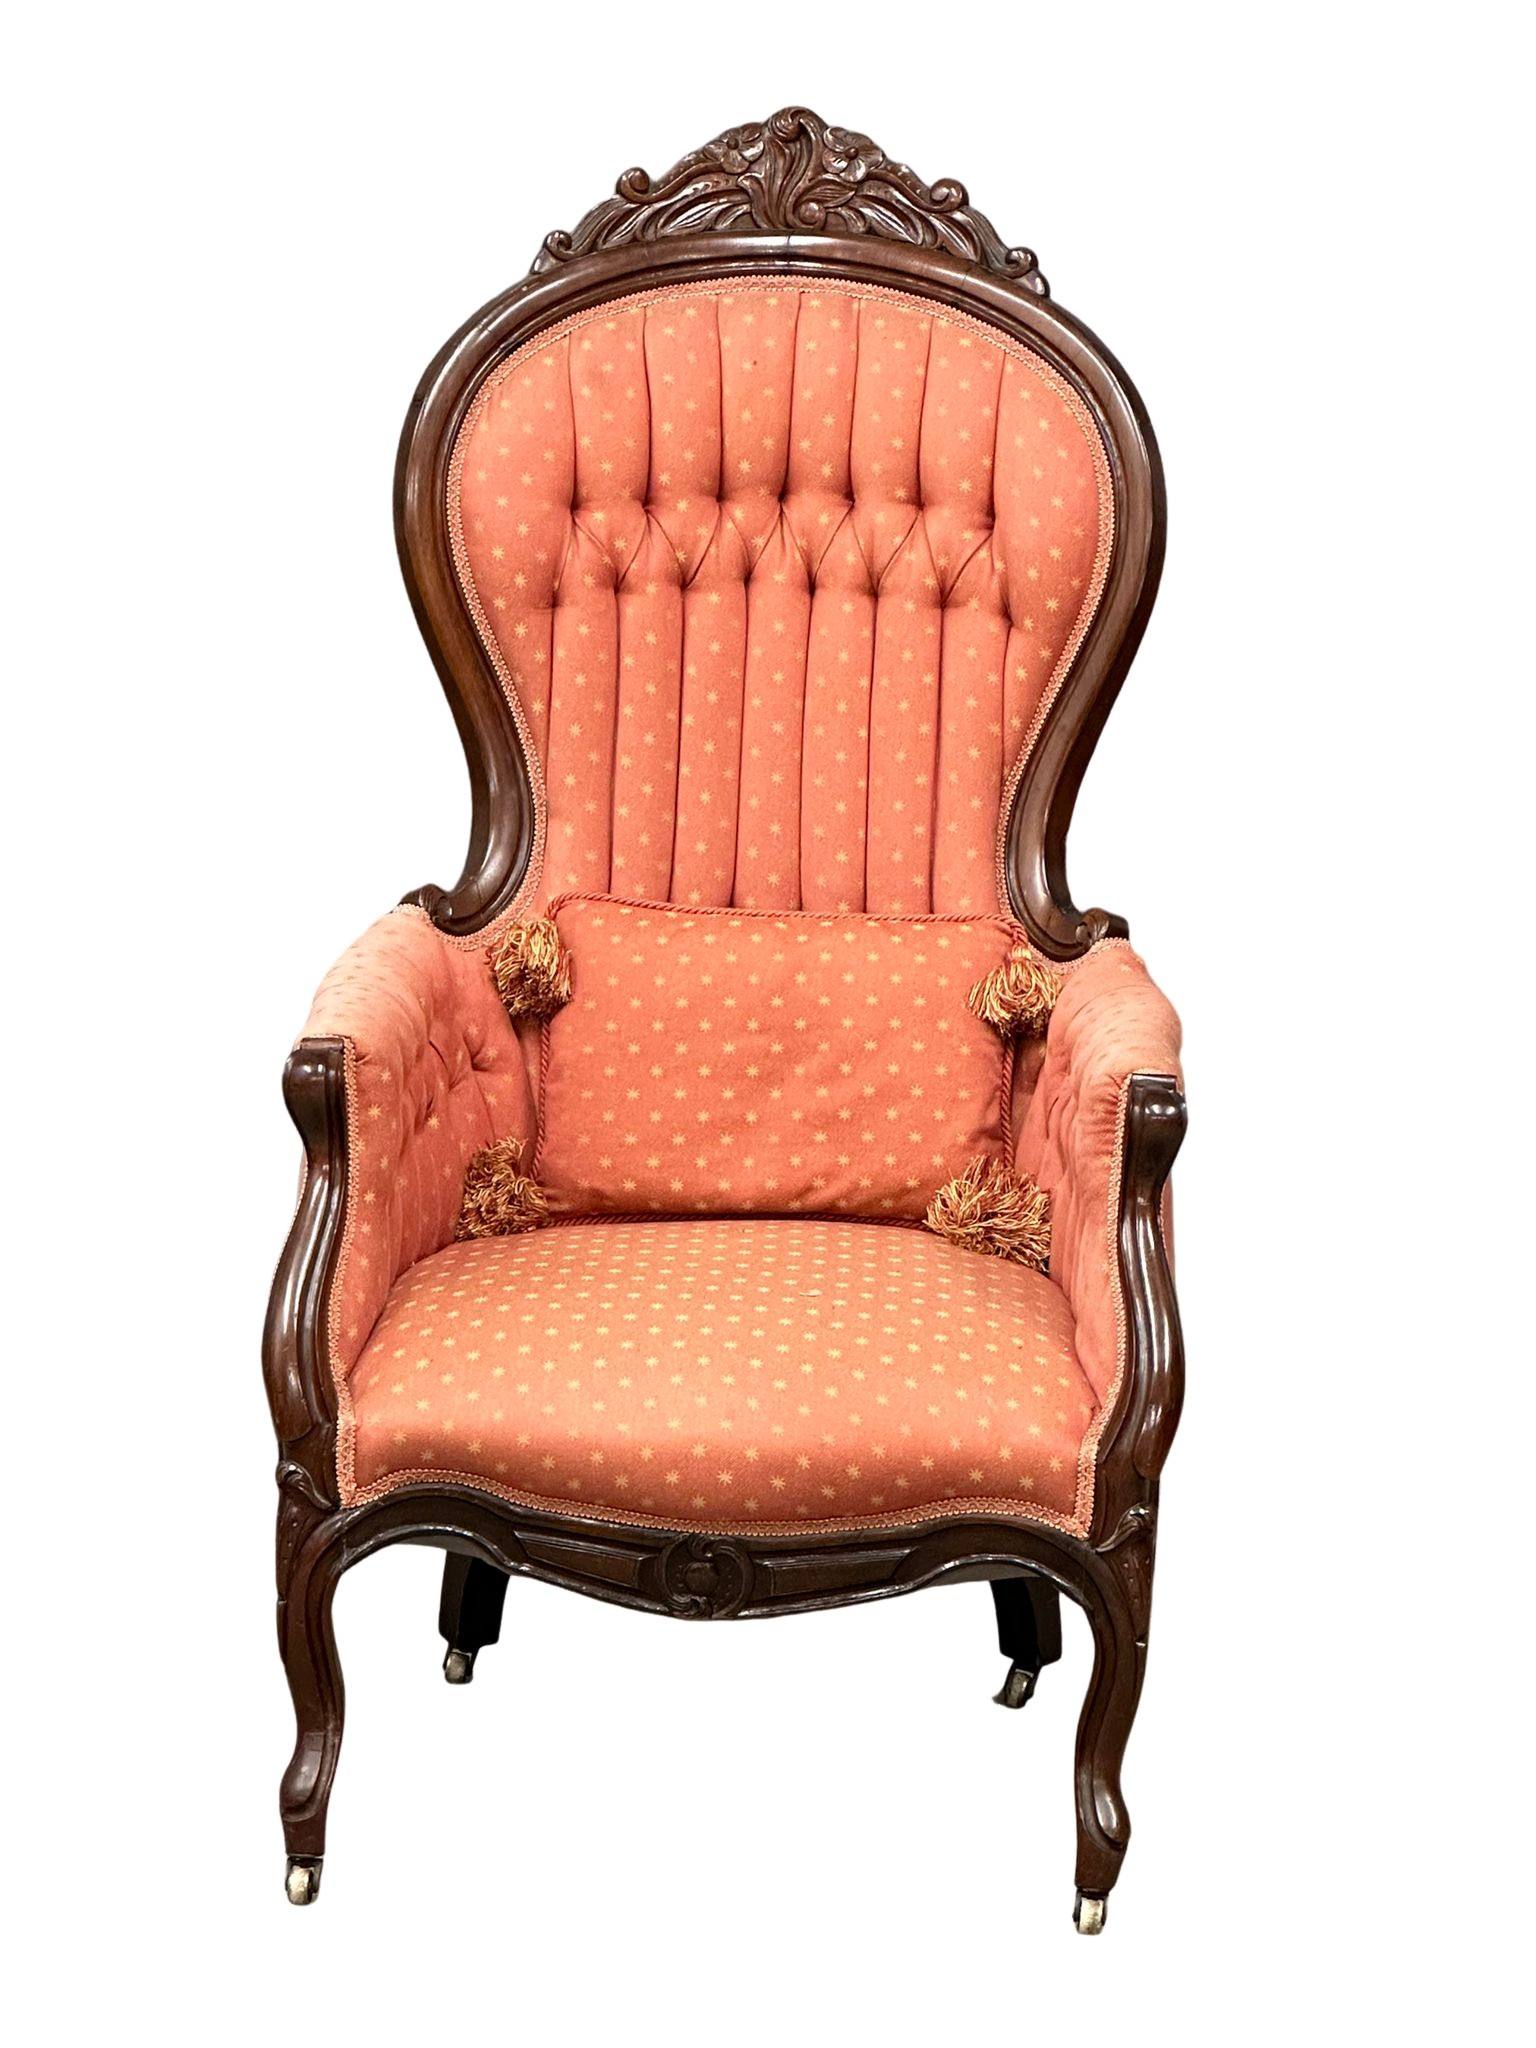 A Victorian mahogany deep buttoned back armchair on cabriole legs.